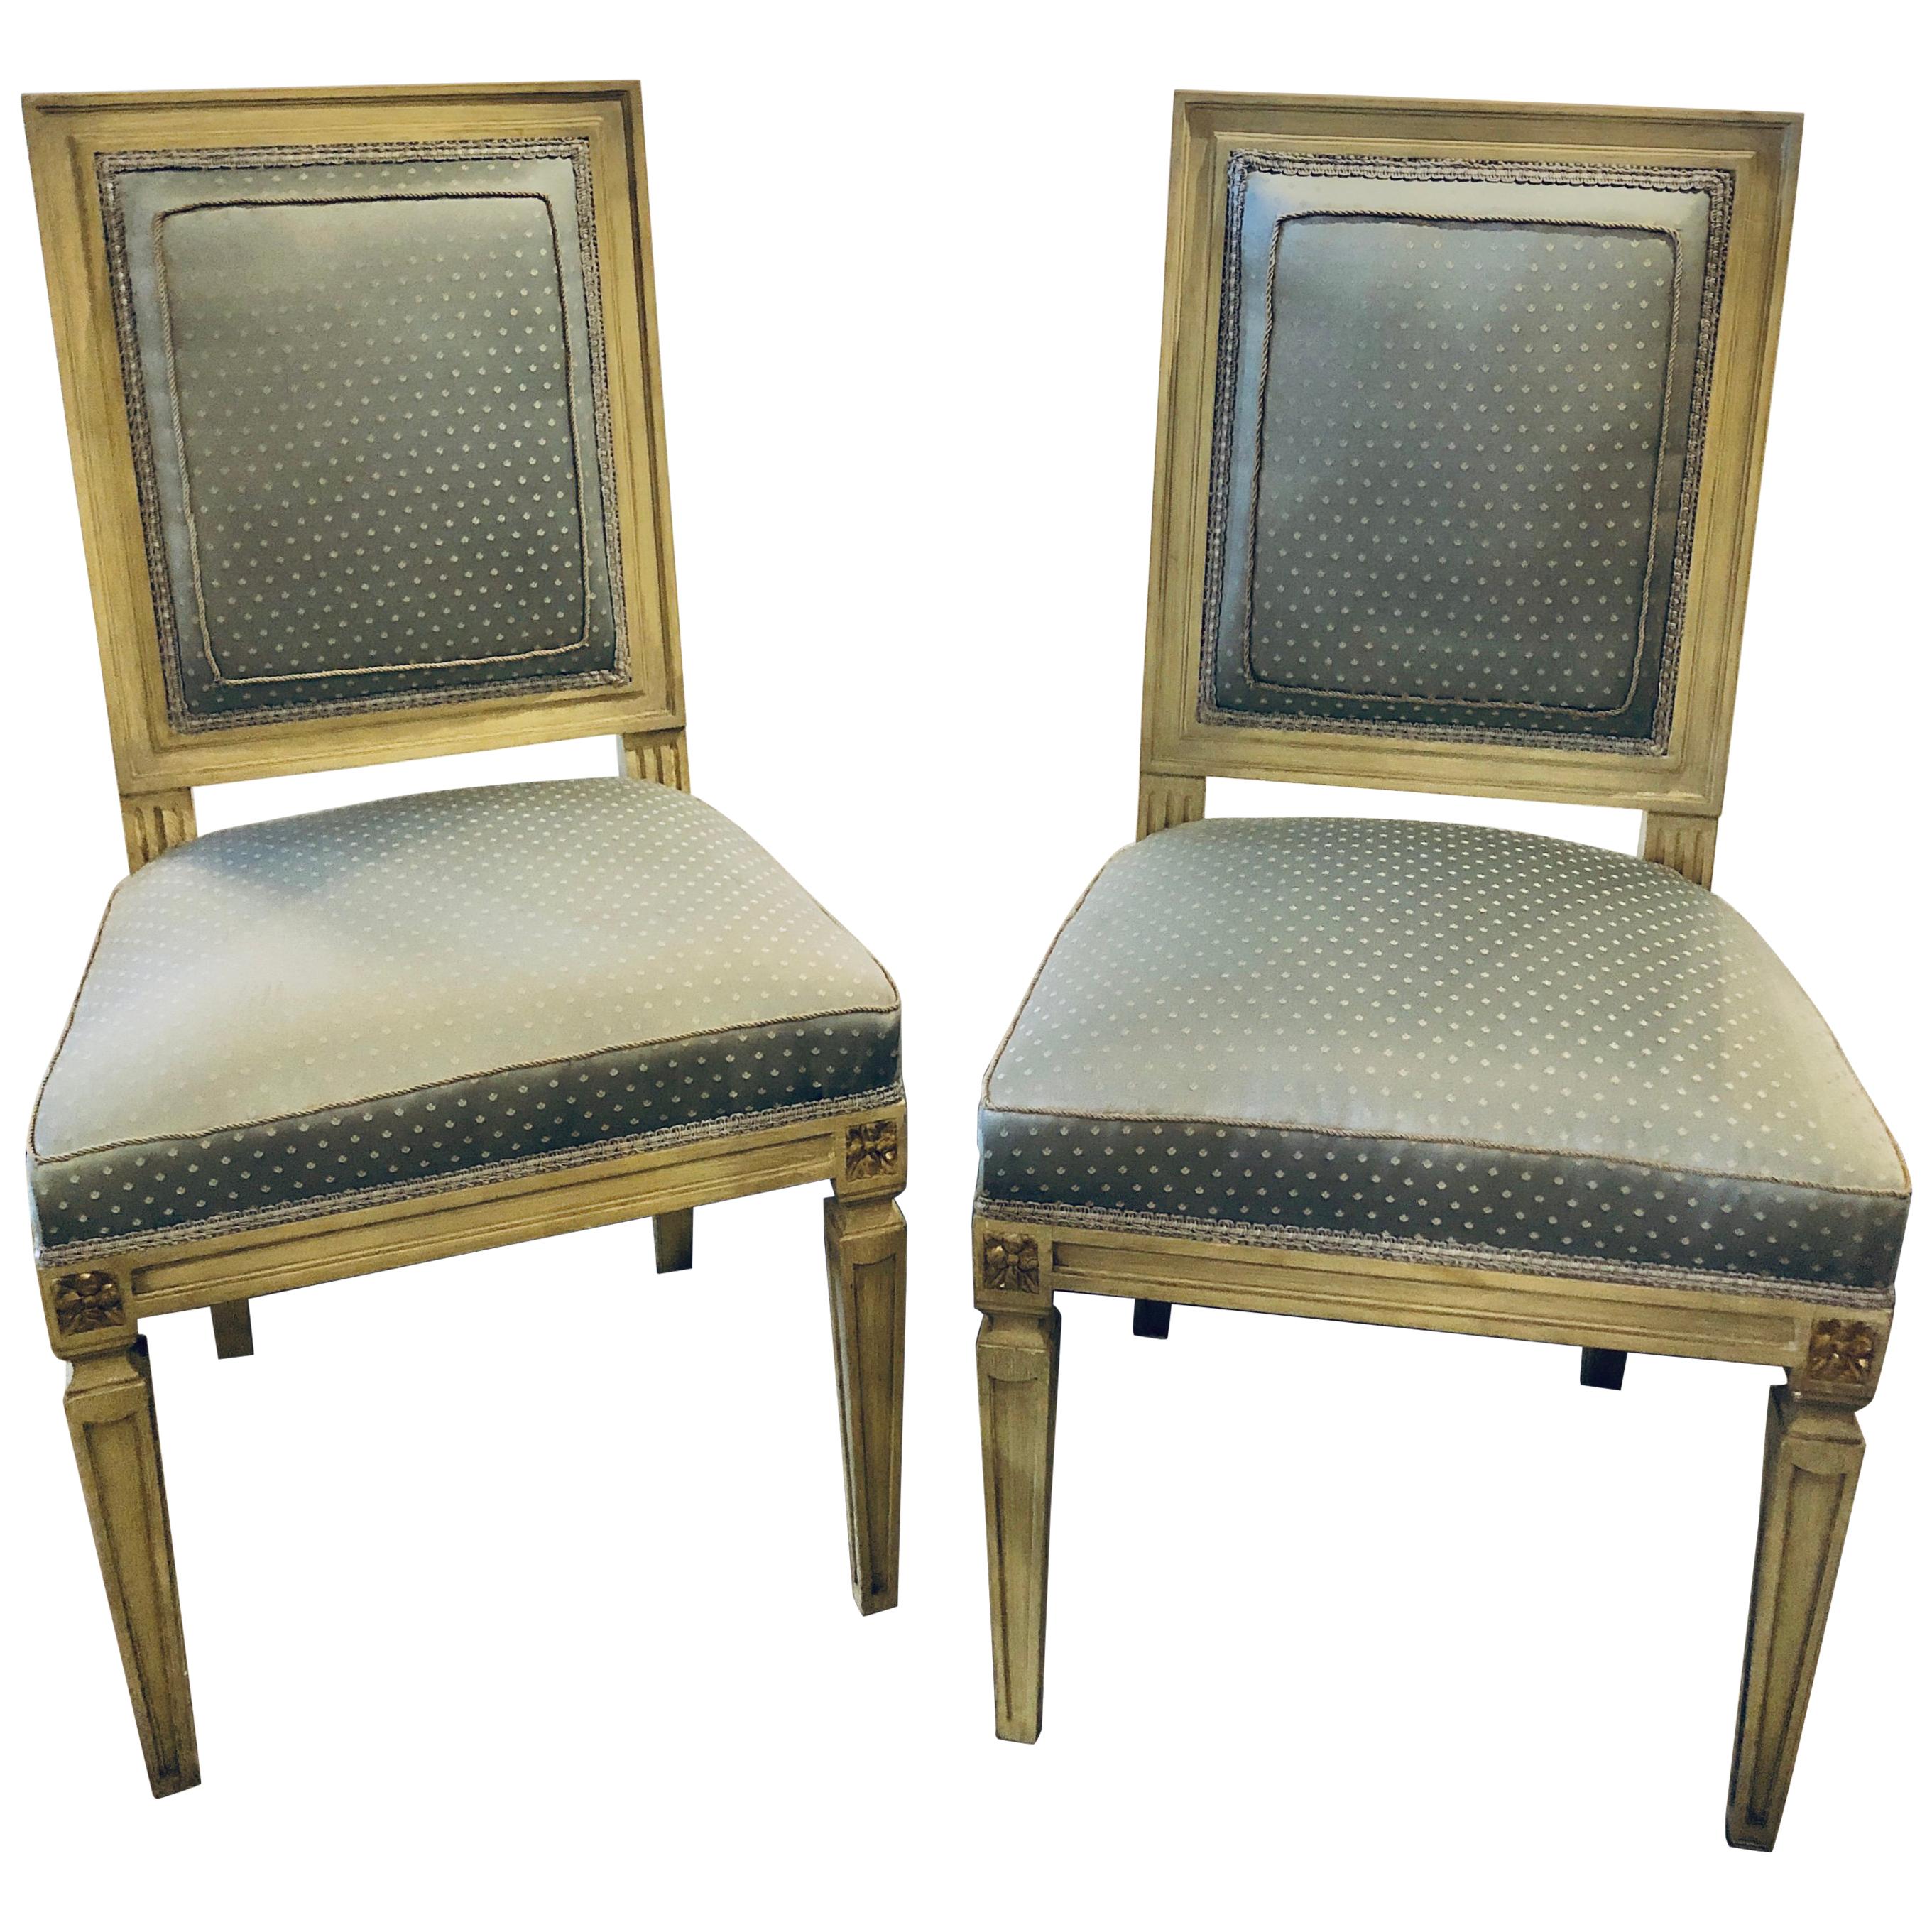 Set of eleven Jansen style paint decorated and Gilt Louis XVI style dining chairs. Each in a new upholstery with new springs and welts. The set with fine sleek and clean lines in a linen grayish form of parchment faux paint with gilt hi lights. The